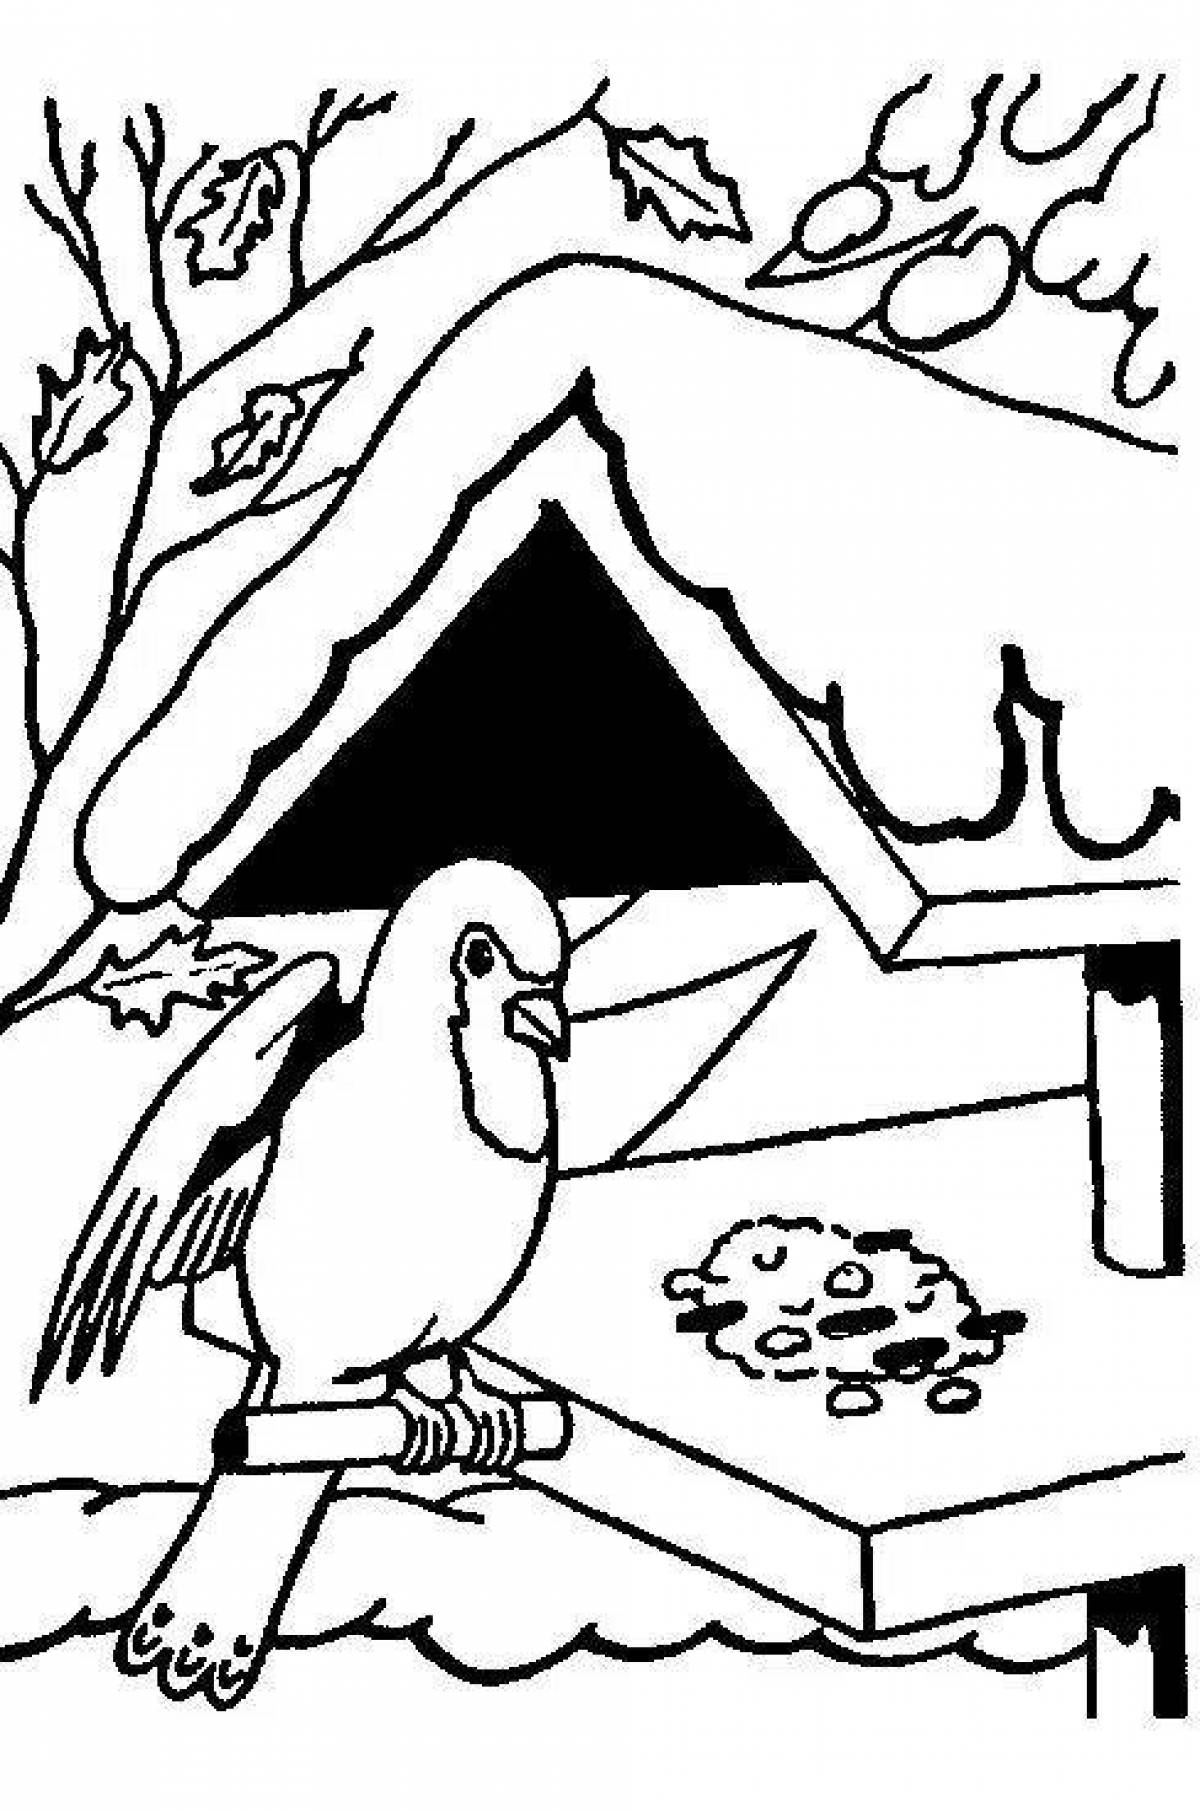 Amazing bird feeder coloring book for kids in winter